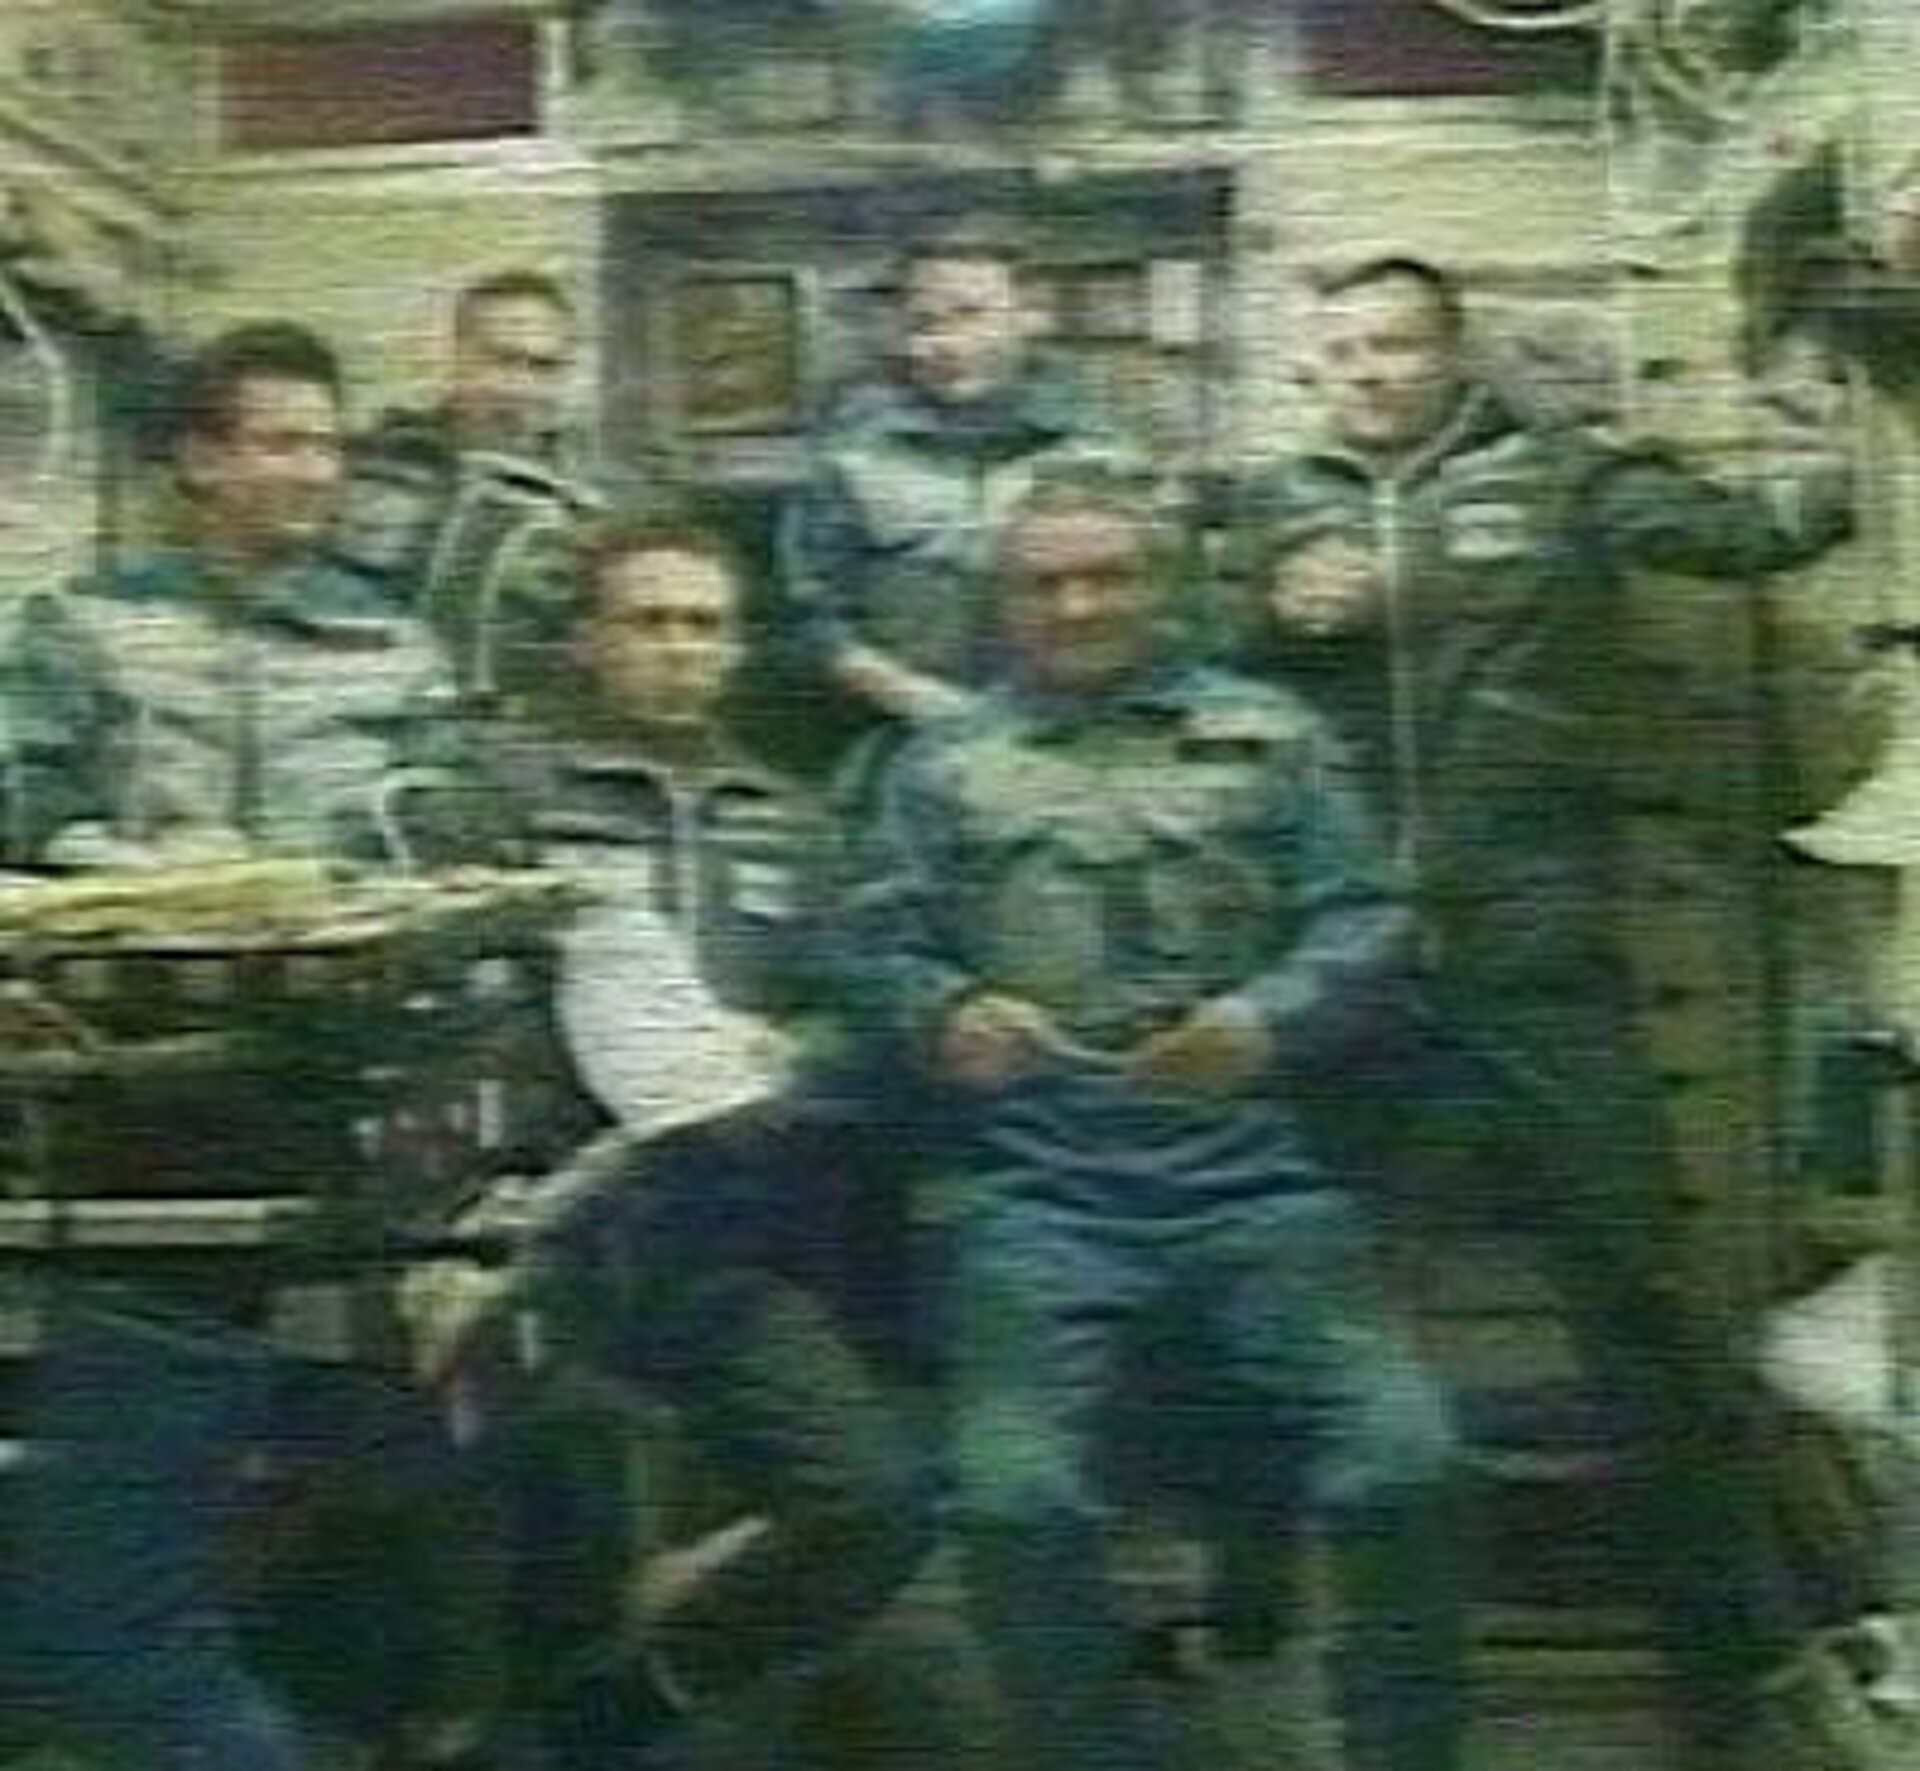 Odissea crew shortly after entering ISS, shown here together with Expedition Five crew during a joint inflight call